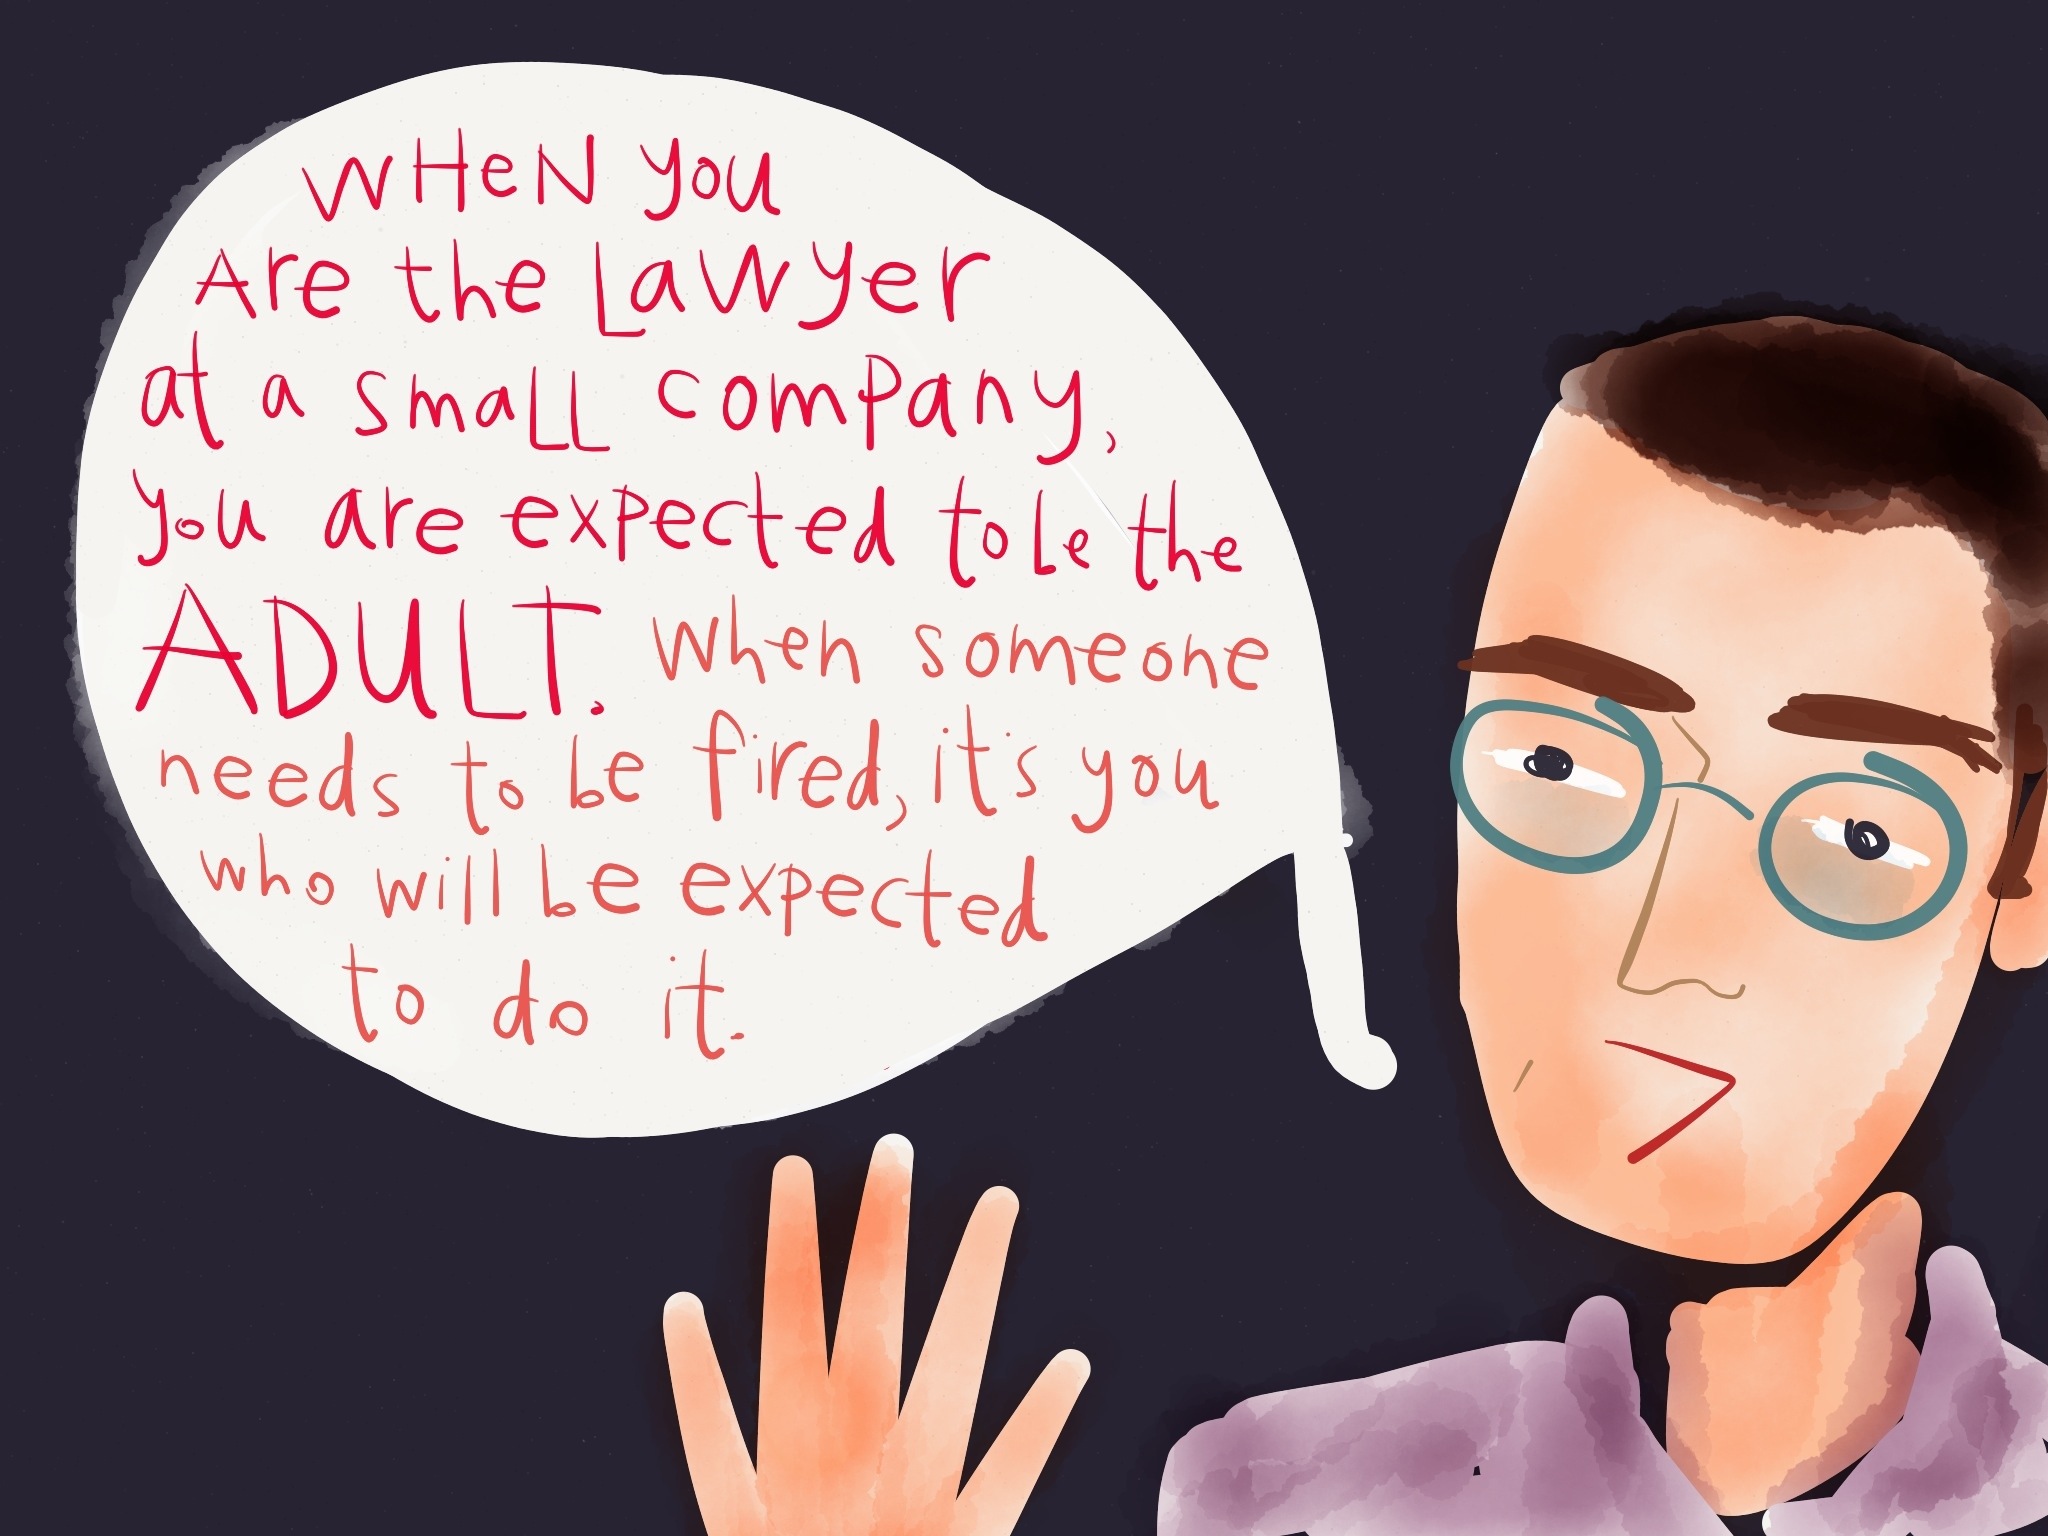 The lawyer as the adult